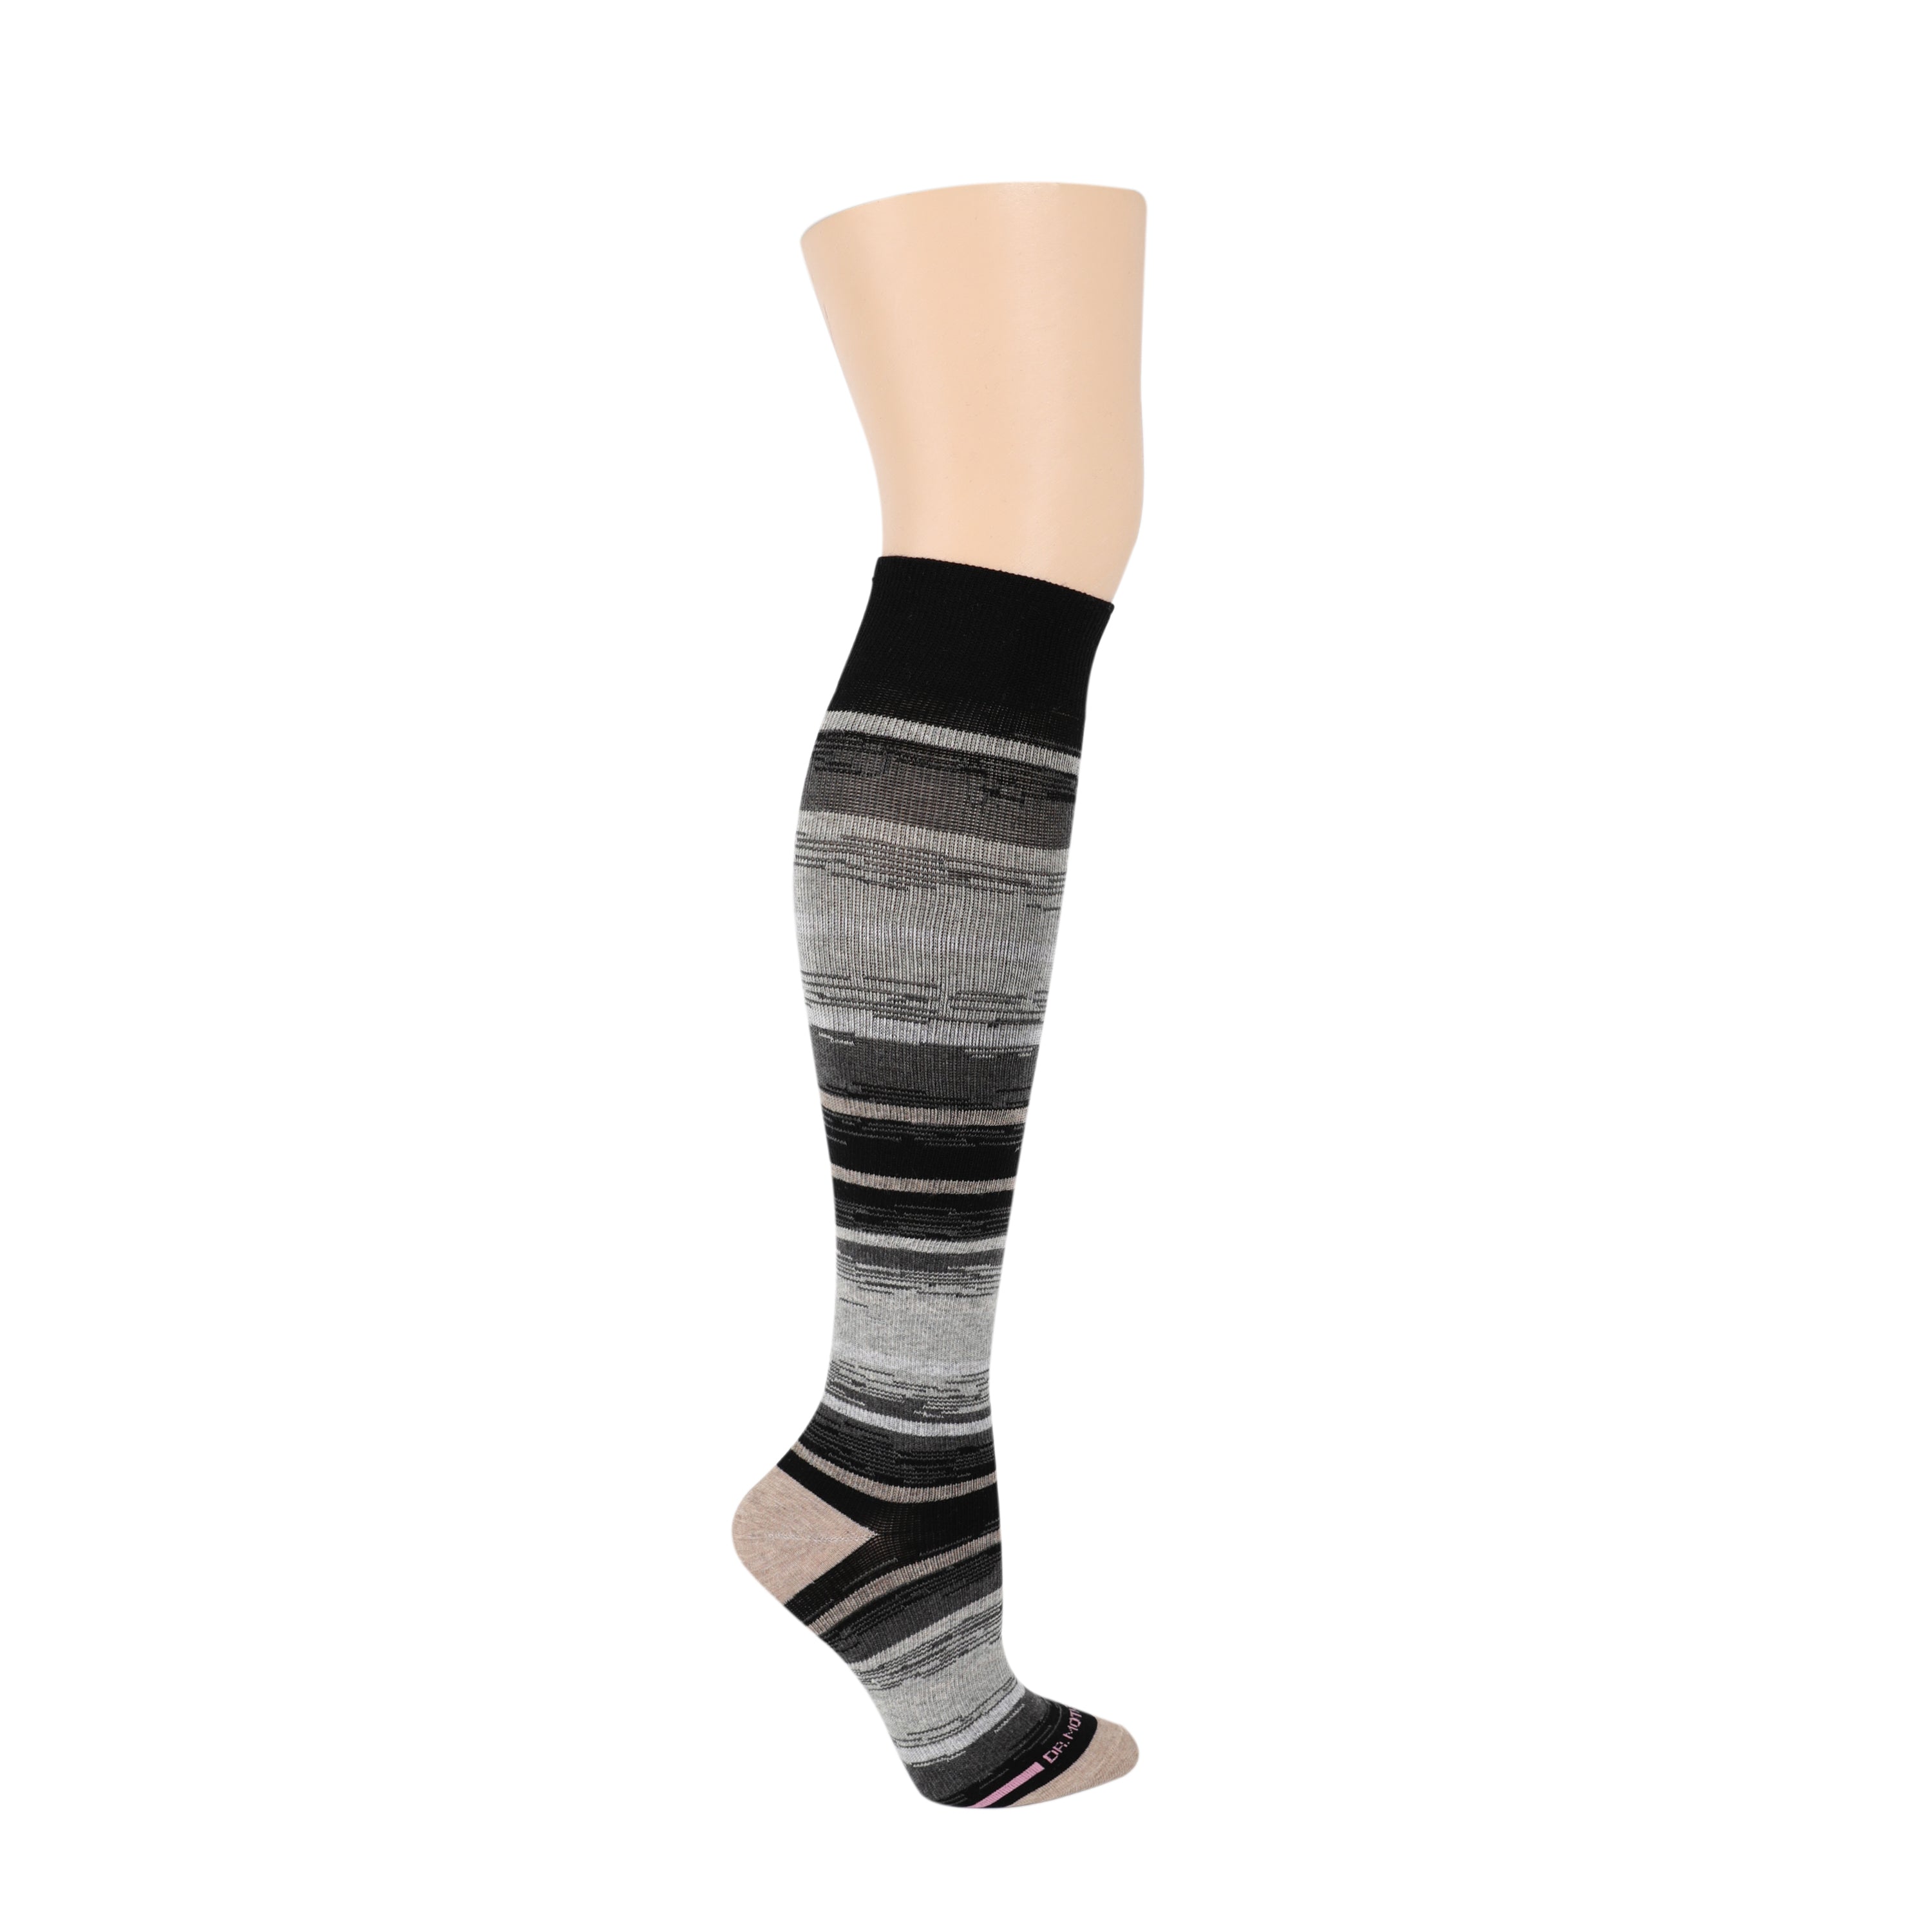 Dr. Motion Argyle Women's Compression Socks - Free Shipping